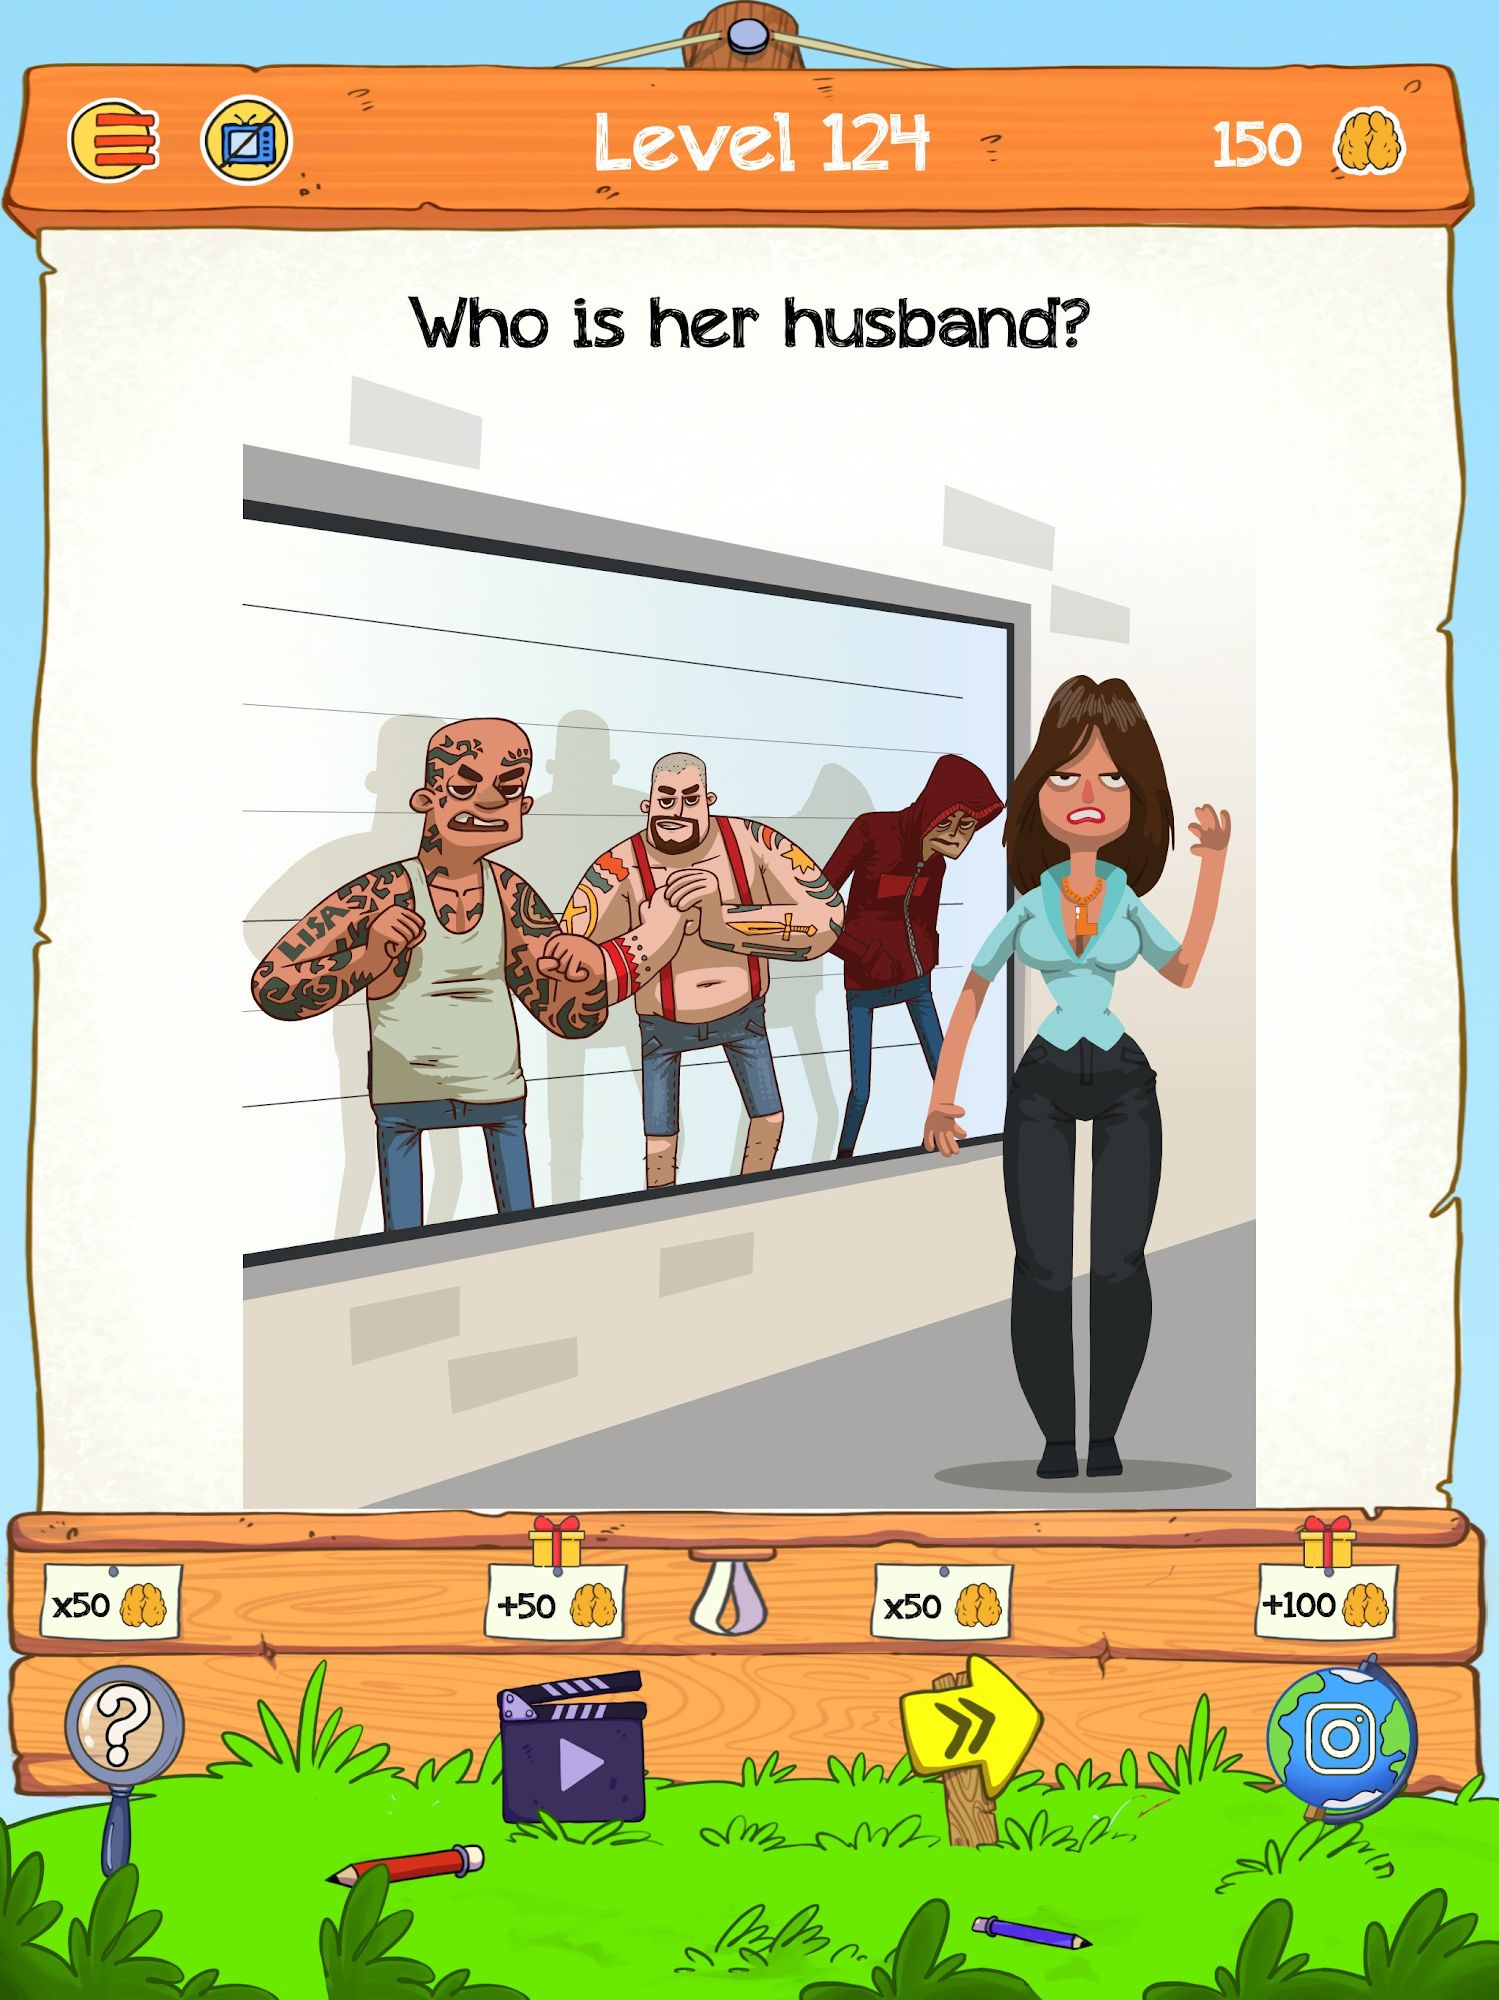 Braindom 2: Who is Lying? Fun Brain Teaser Riddles for Android